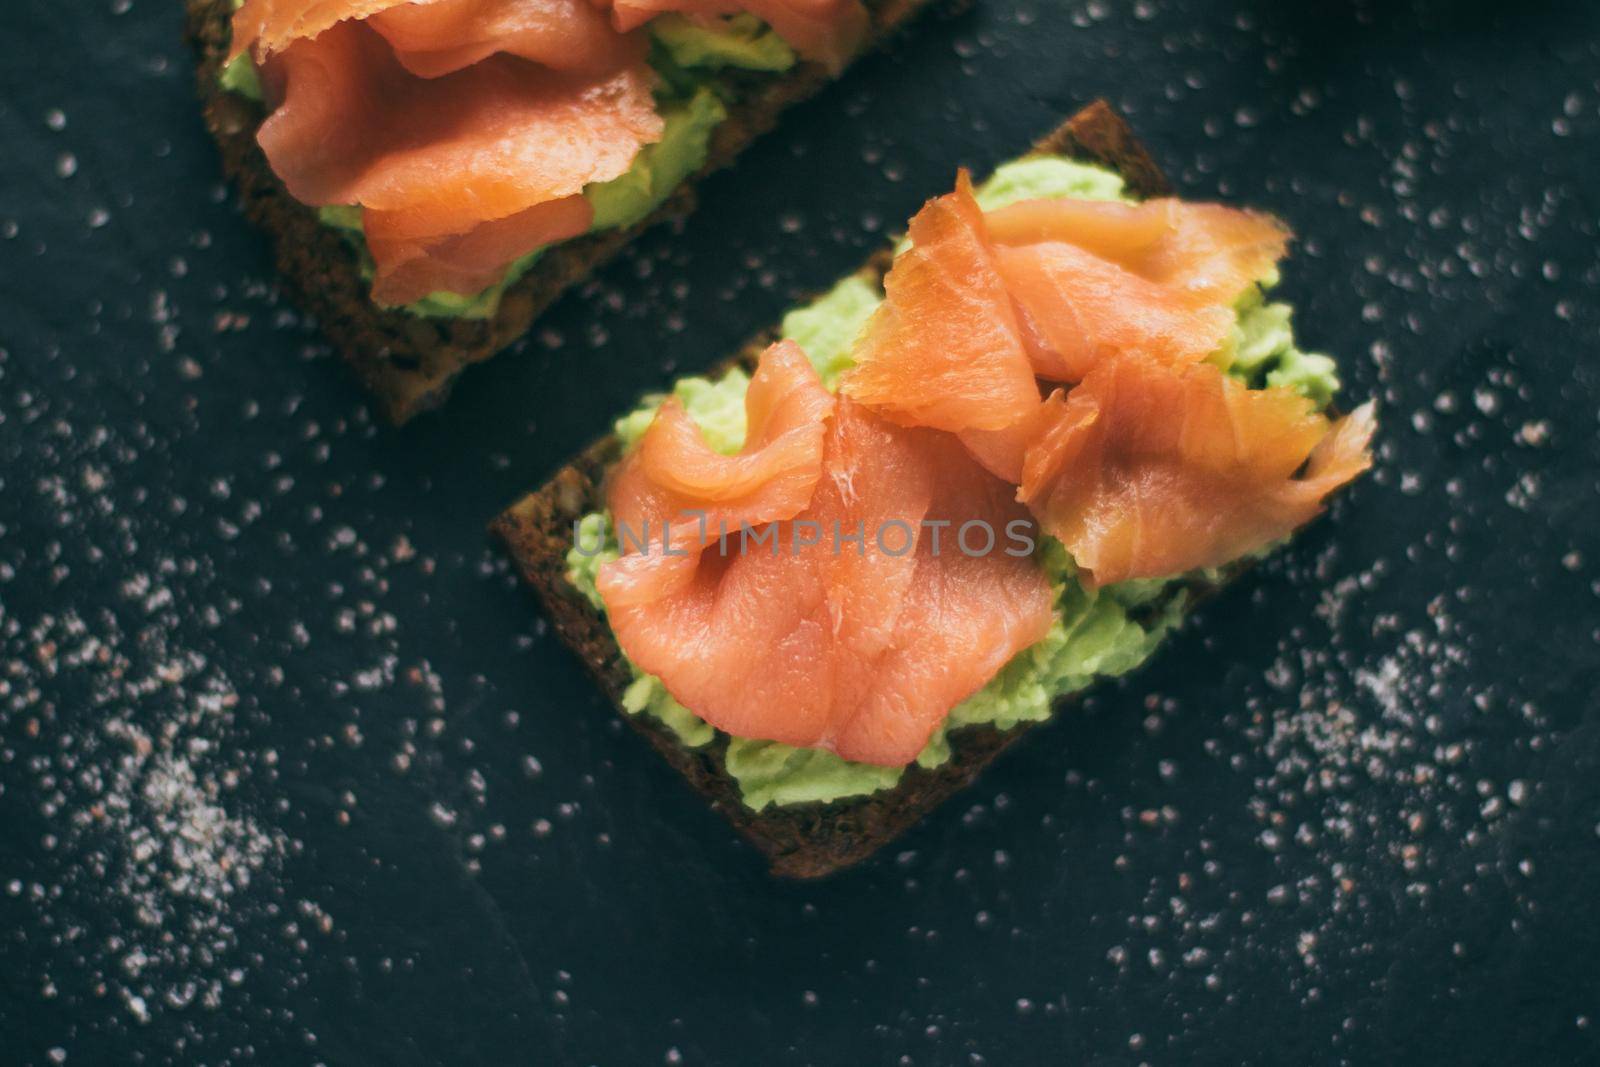 smoked salmon sandwich - healthy snacks and homemade food styled concept, elegant visuals